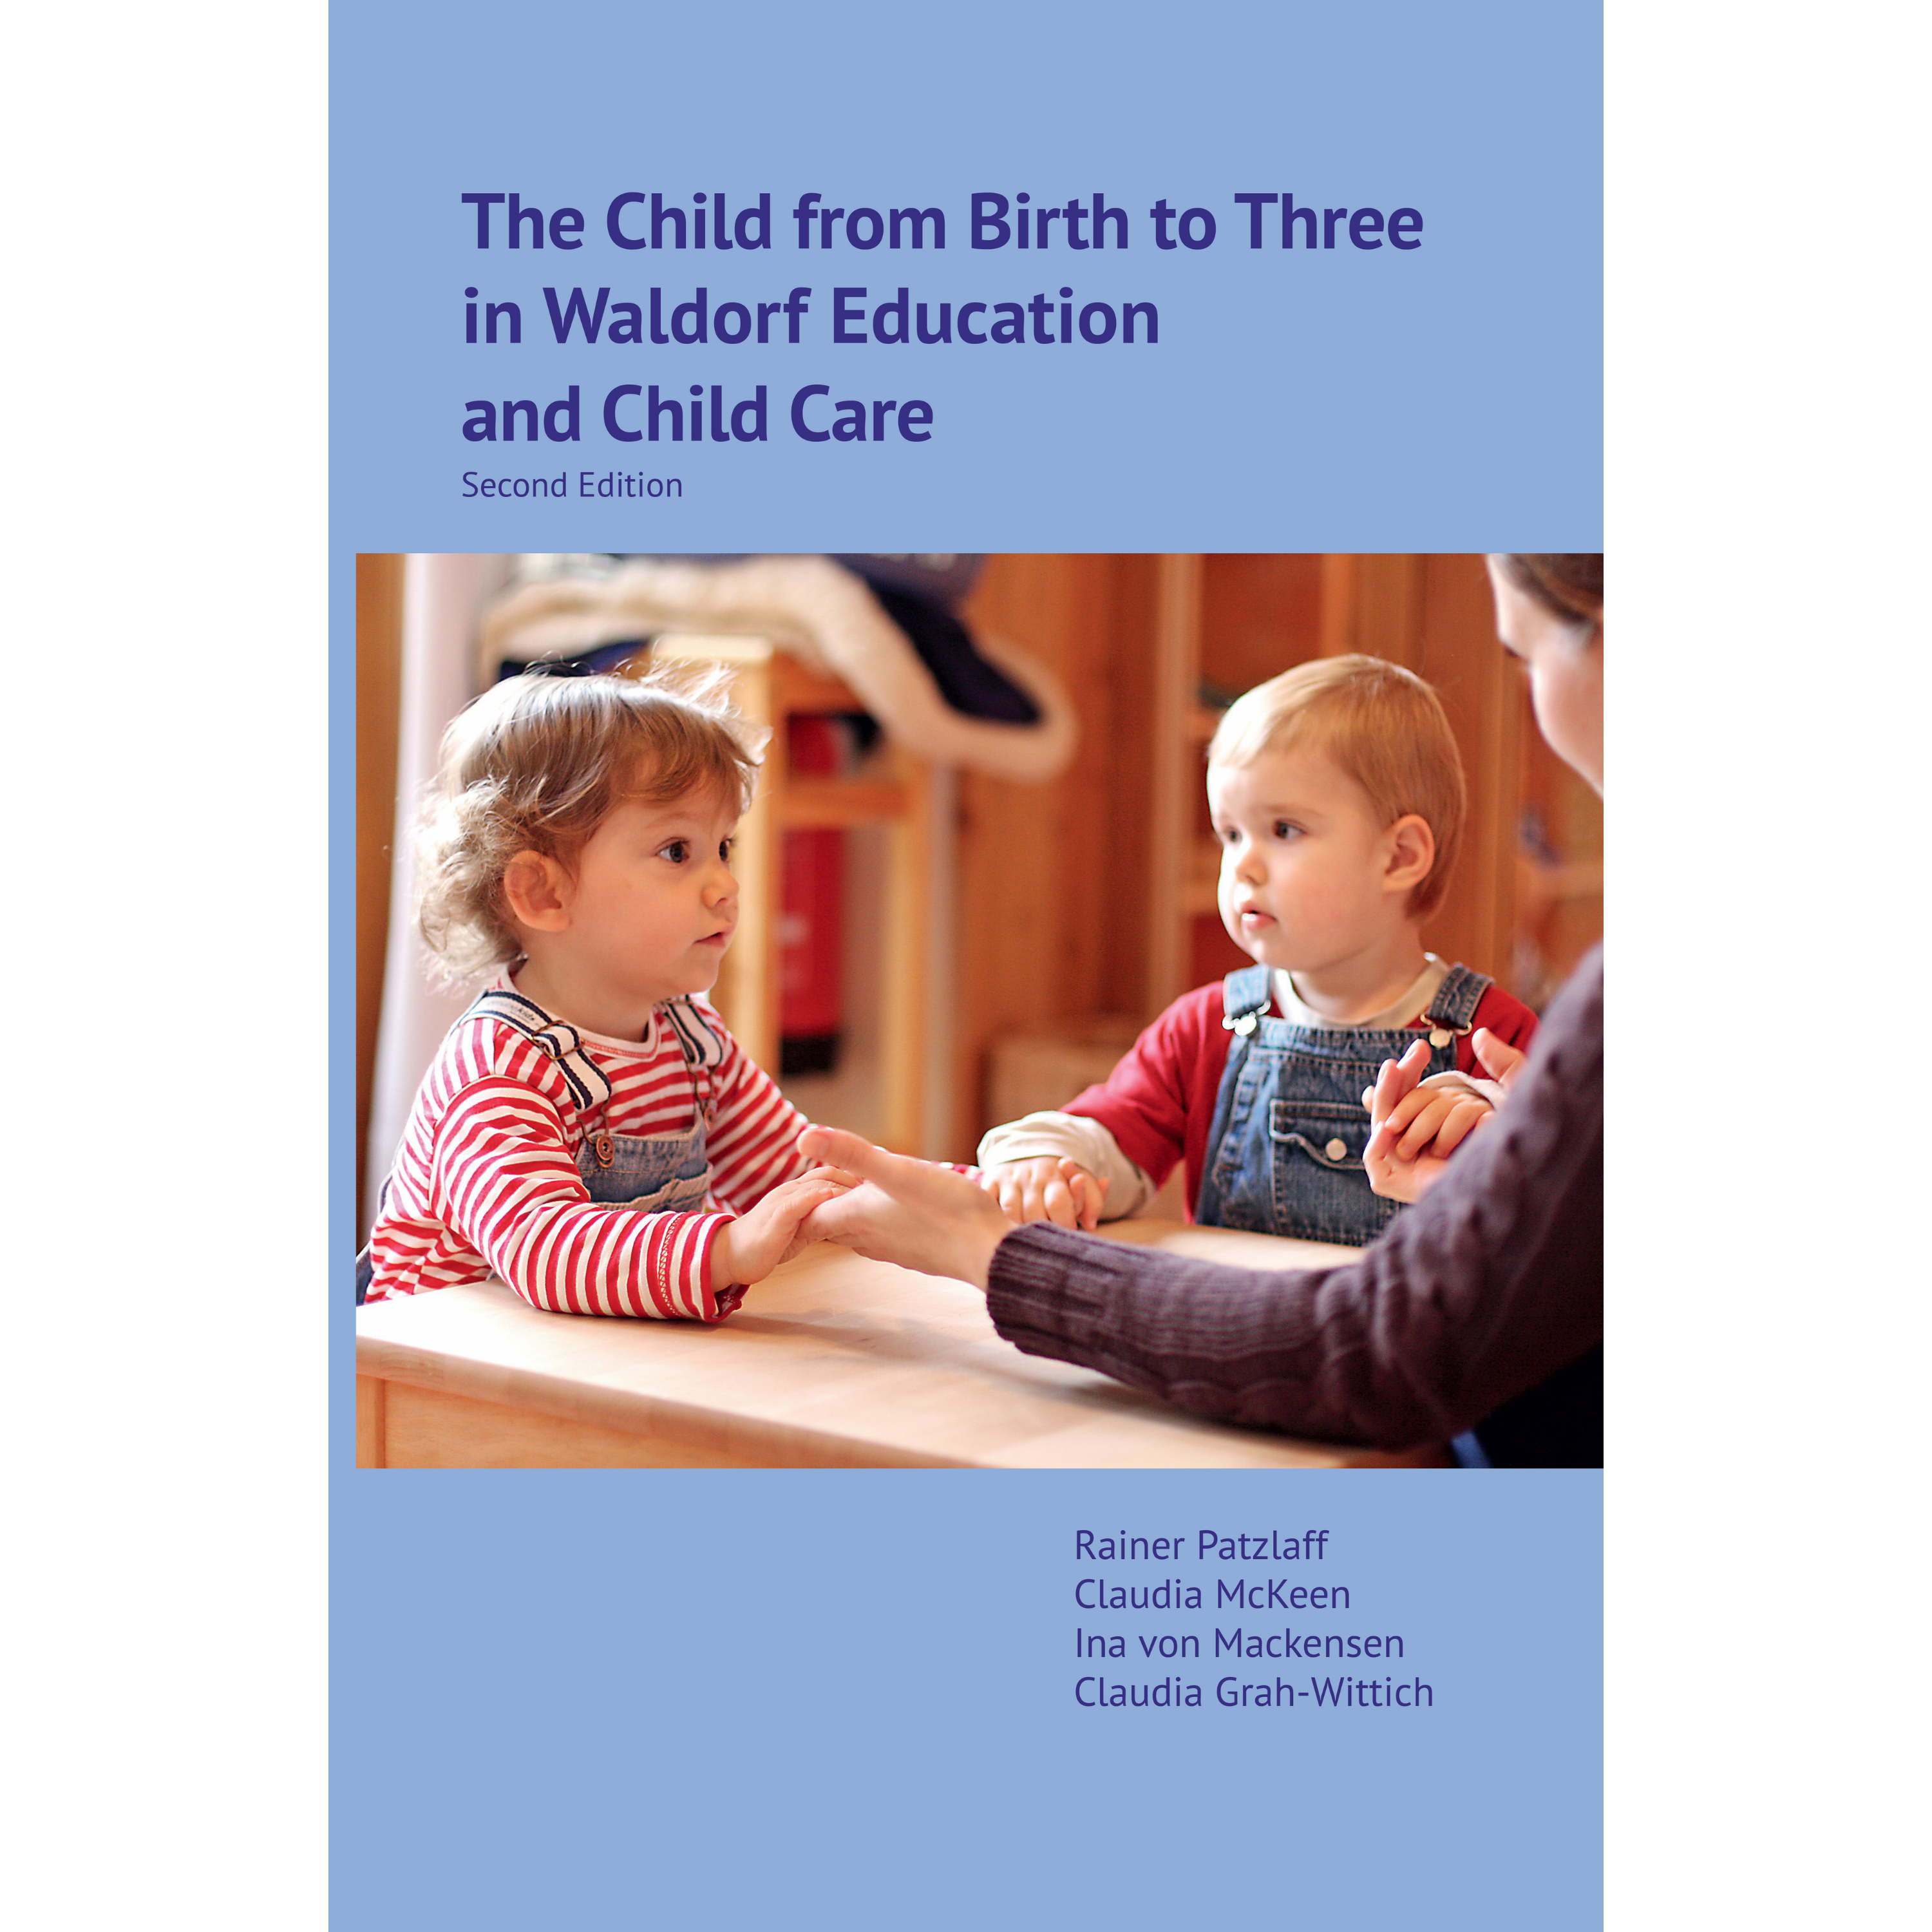 The Child from Birth to Three in Waldorf Education and Child Care - 2nd Edition